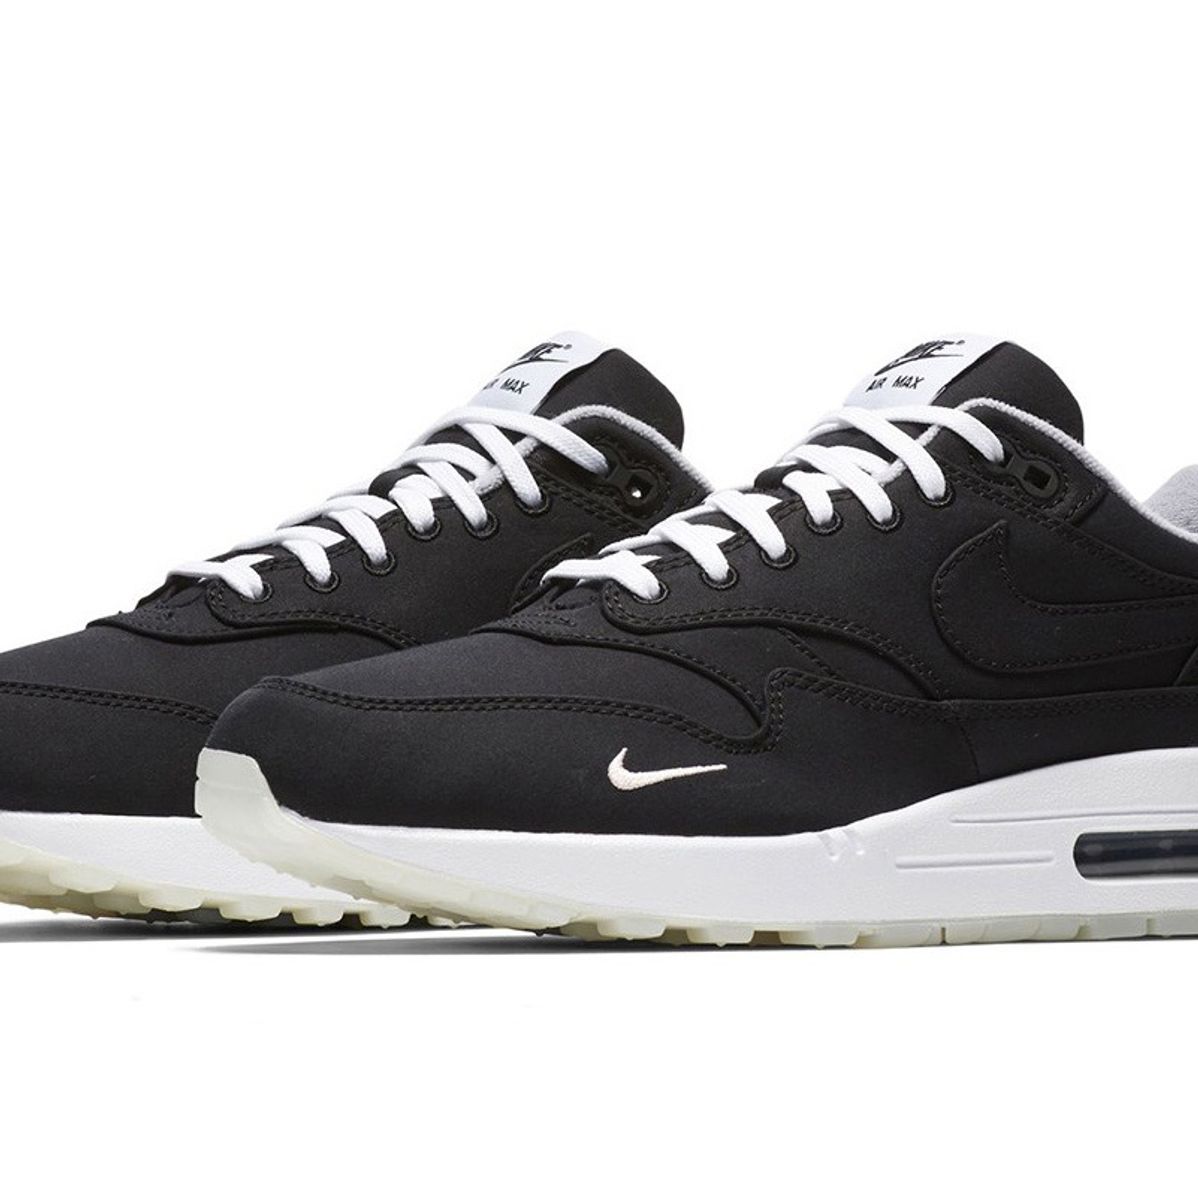 Dover Street Market x Air Max 1 Could Be Back for Air Max Day - Sneaker Freaker